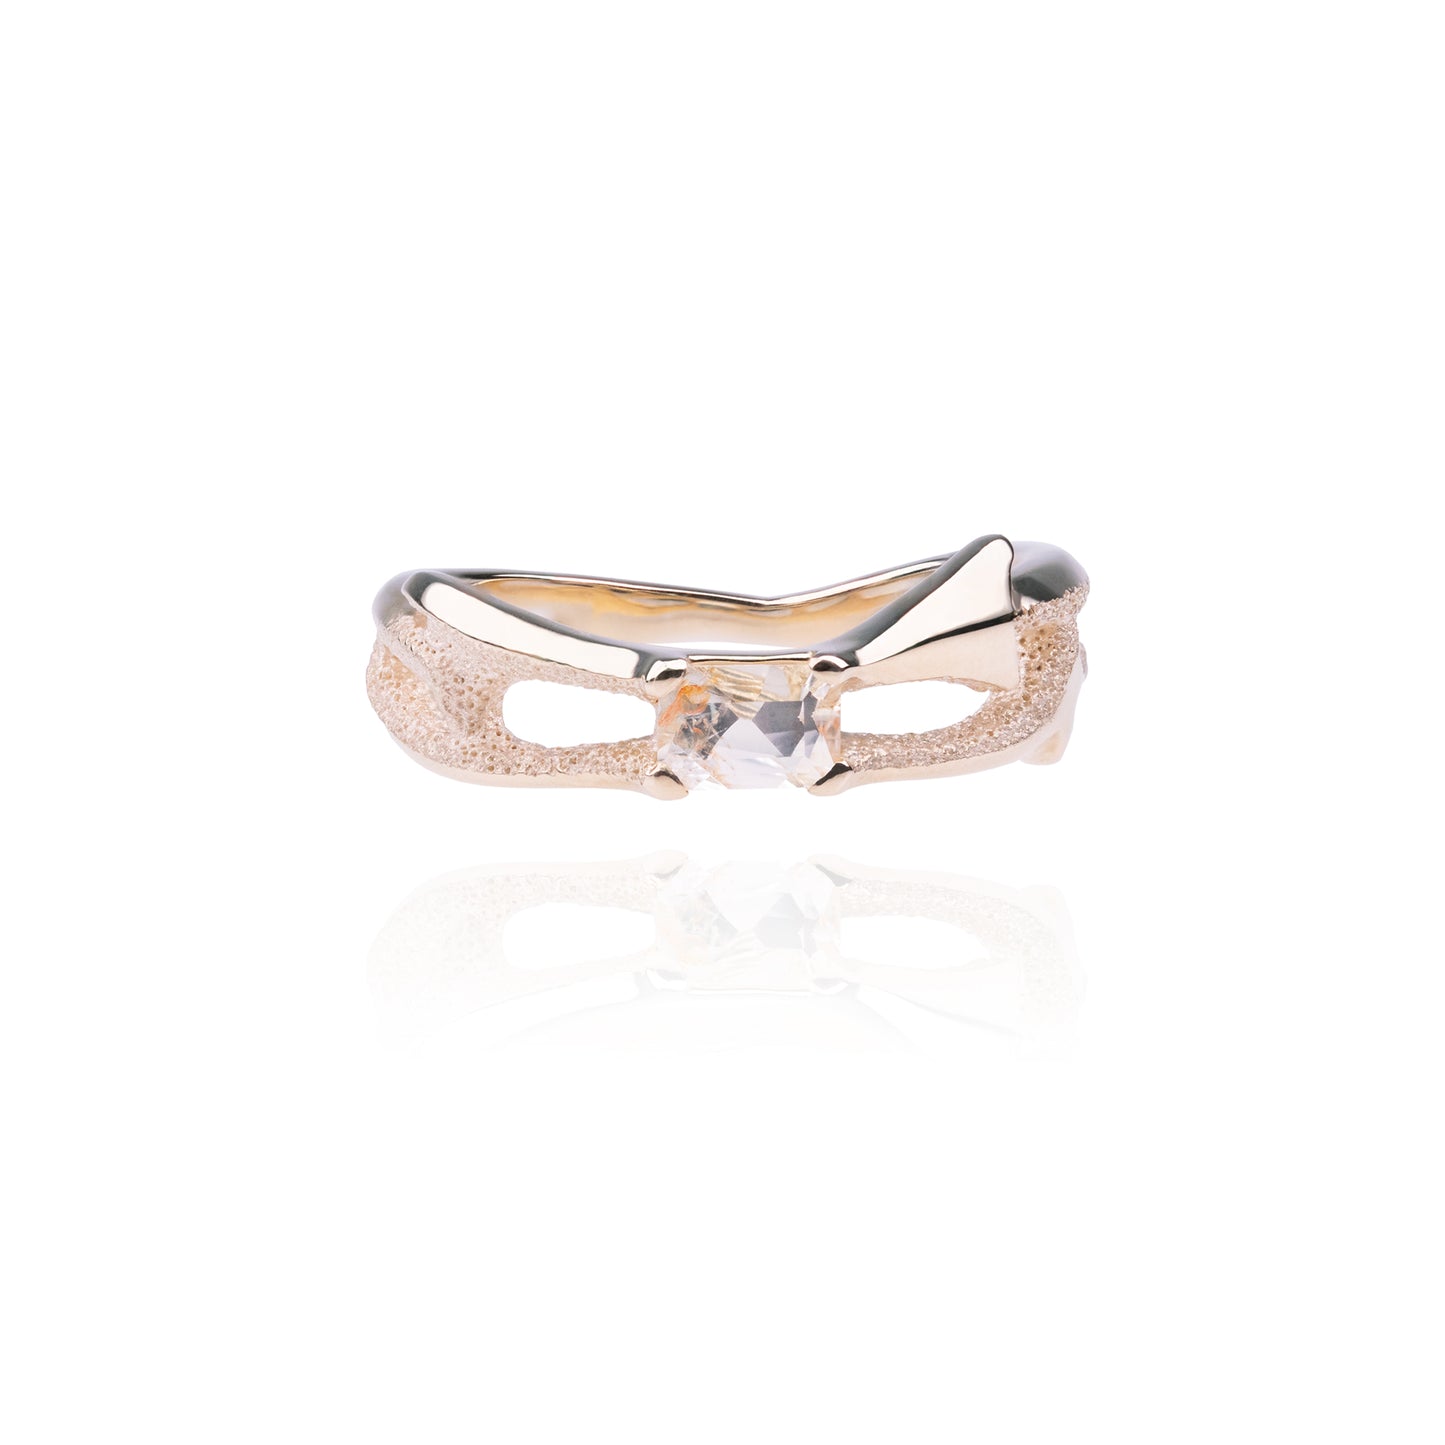 Orme-Brown Contemporary Fine Jewellery ethical engagement ring in sustainable recycled 9ct yellow gold with claw set baguette rectangular white orange sapphire 